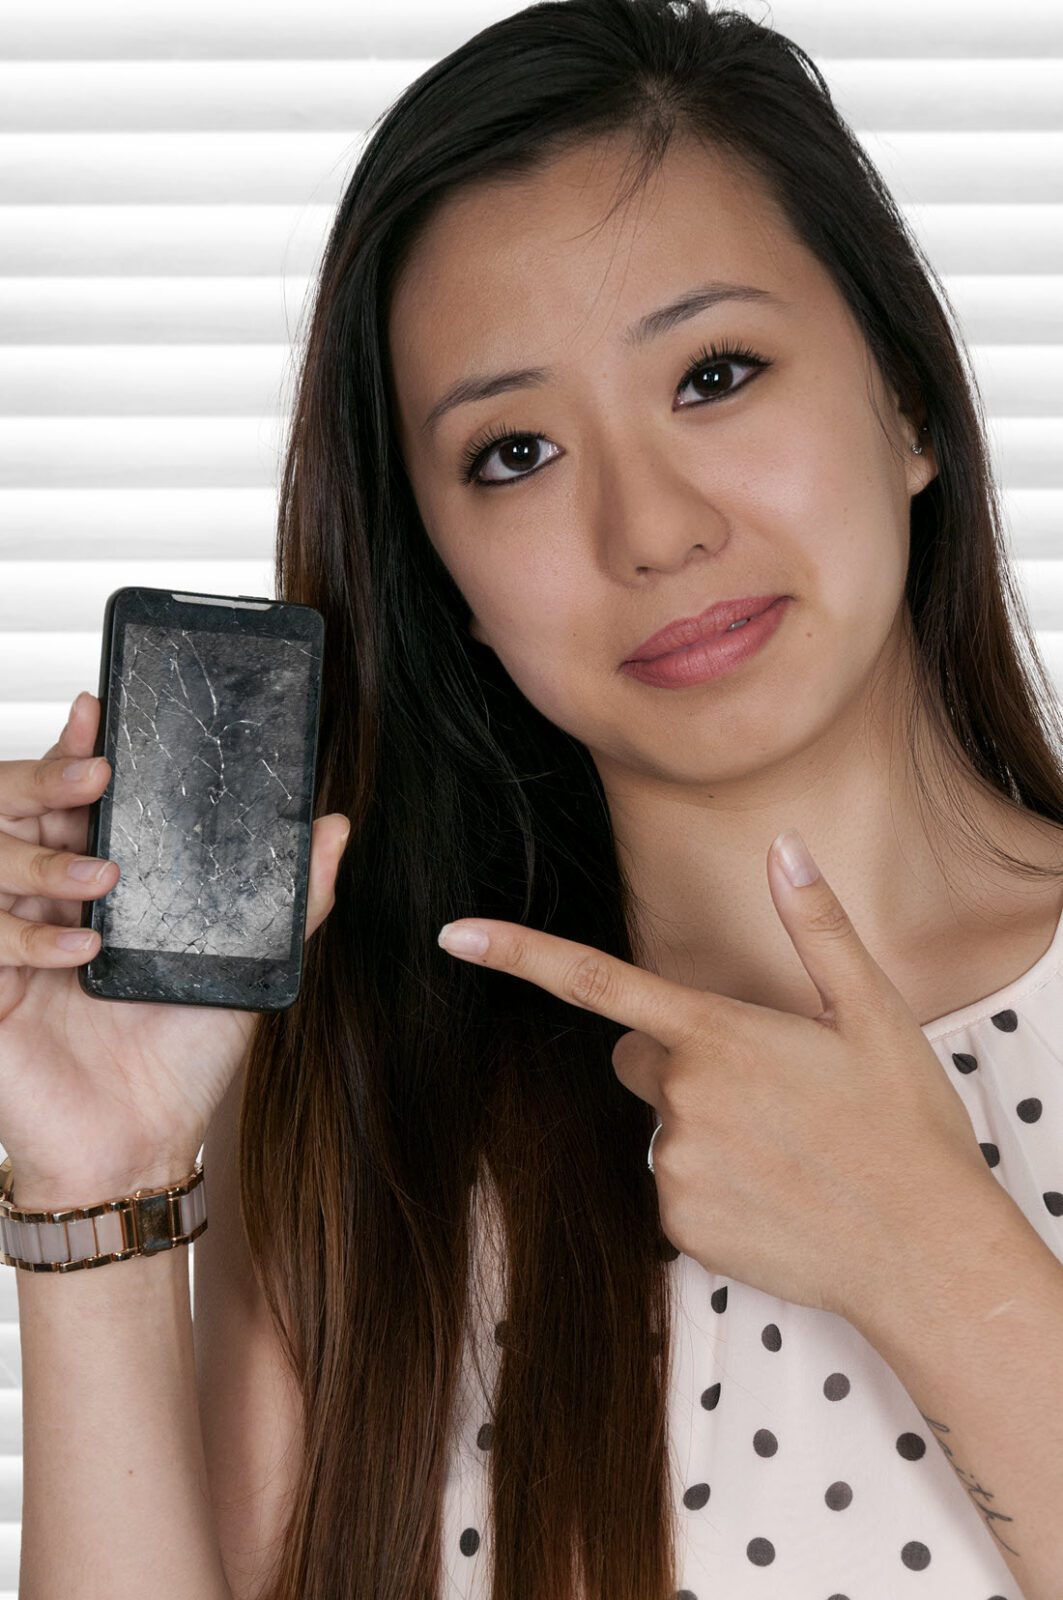 How To Repair a Cracked Phone Screen